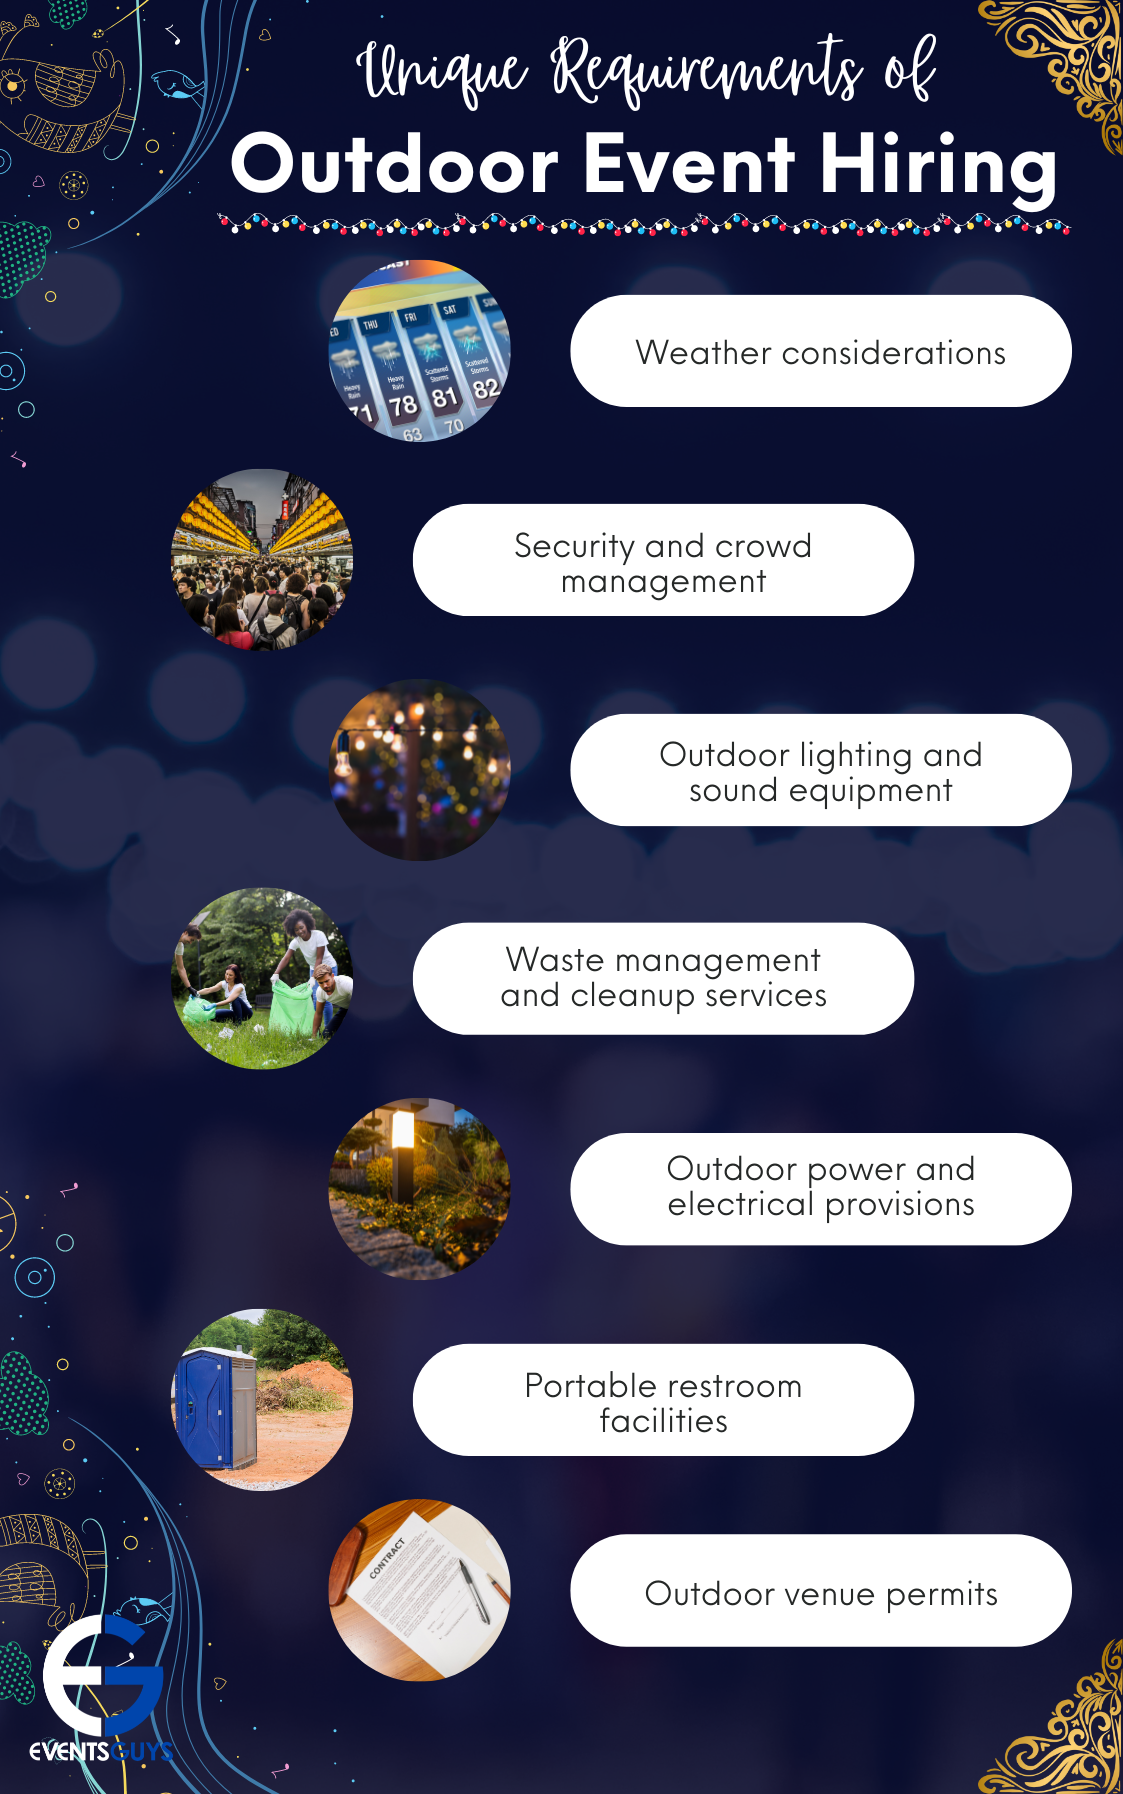 A range of requirements for Outdoor Event Hiring Solutions